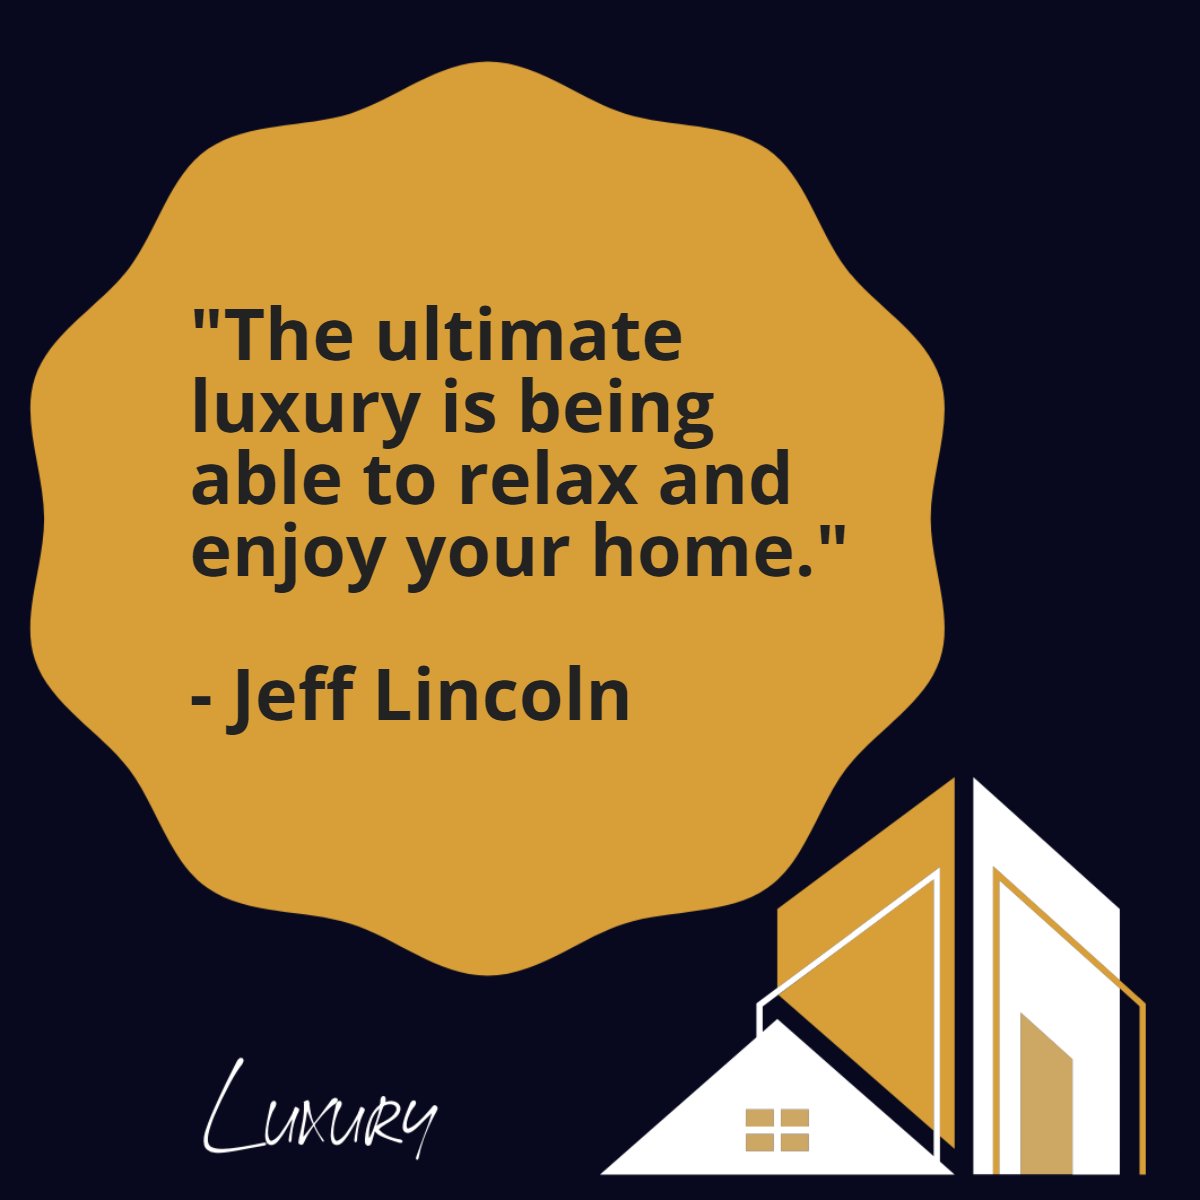 'The ultimate luxury is being able to relax and enjoy your home'
― Jeff Lincoln 📖

#luxurylifestyle #luxury #lovemyhome #home #lifestyle #jefflincoln #quote #quoteoftheday✏️ 
 #owninnaples #NaplesFL #Beach #LiveinNaples